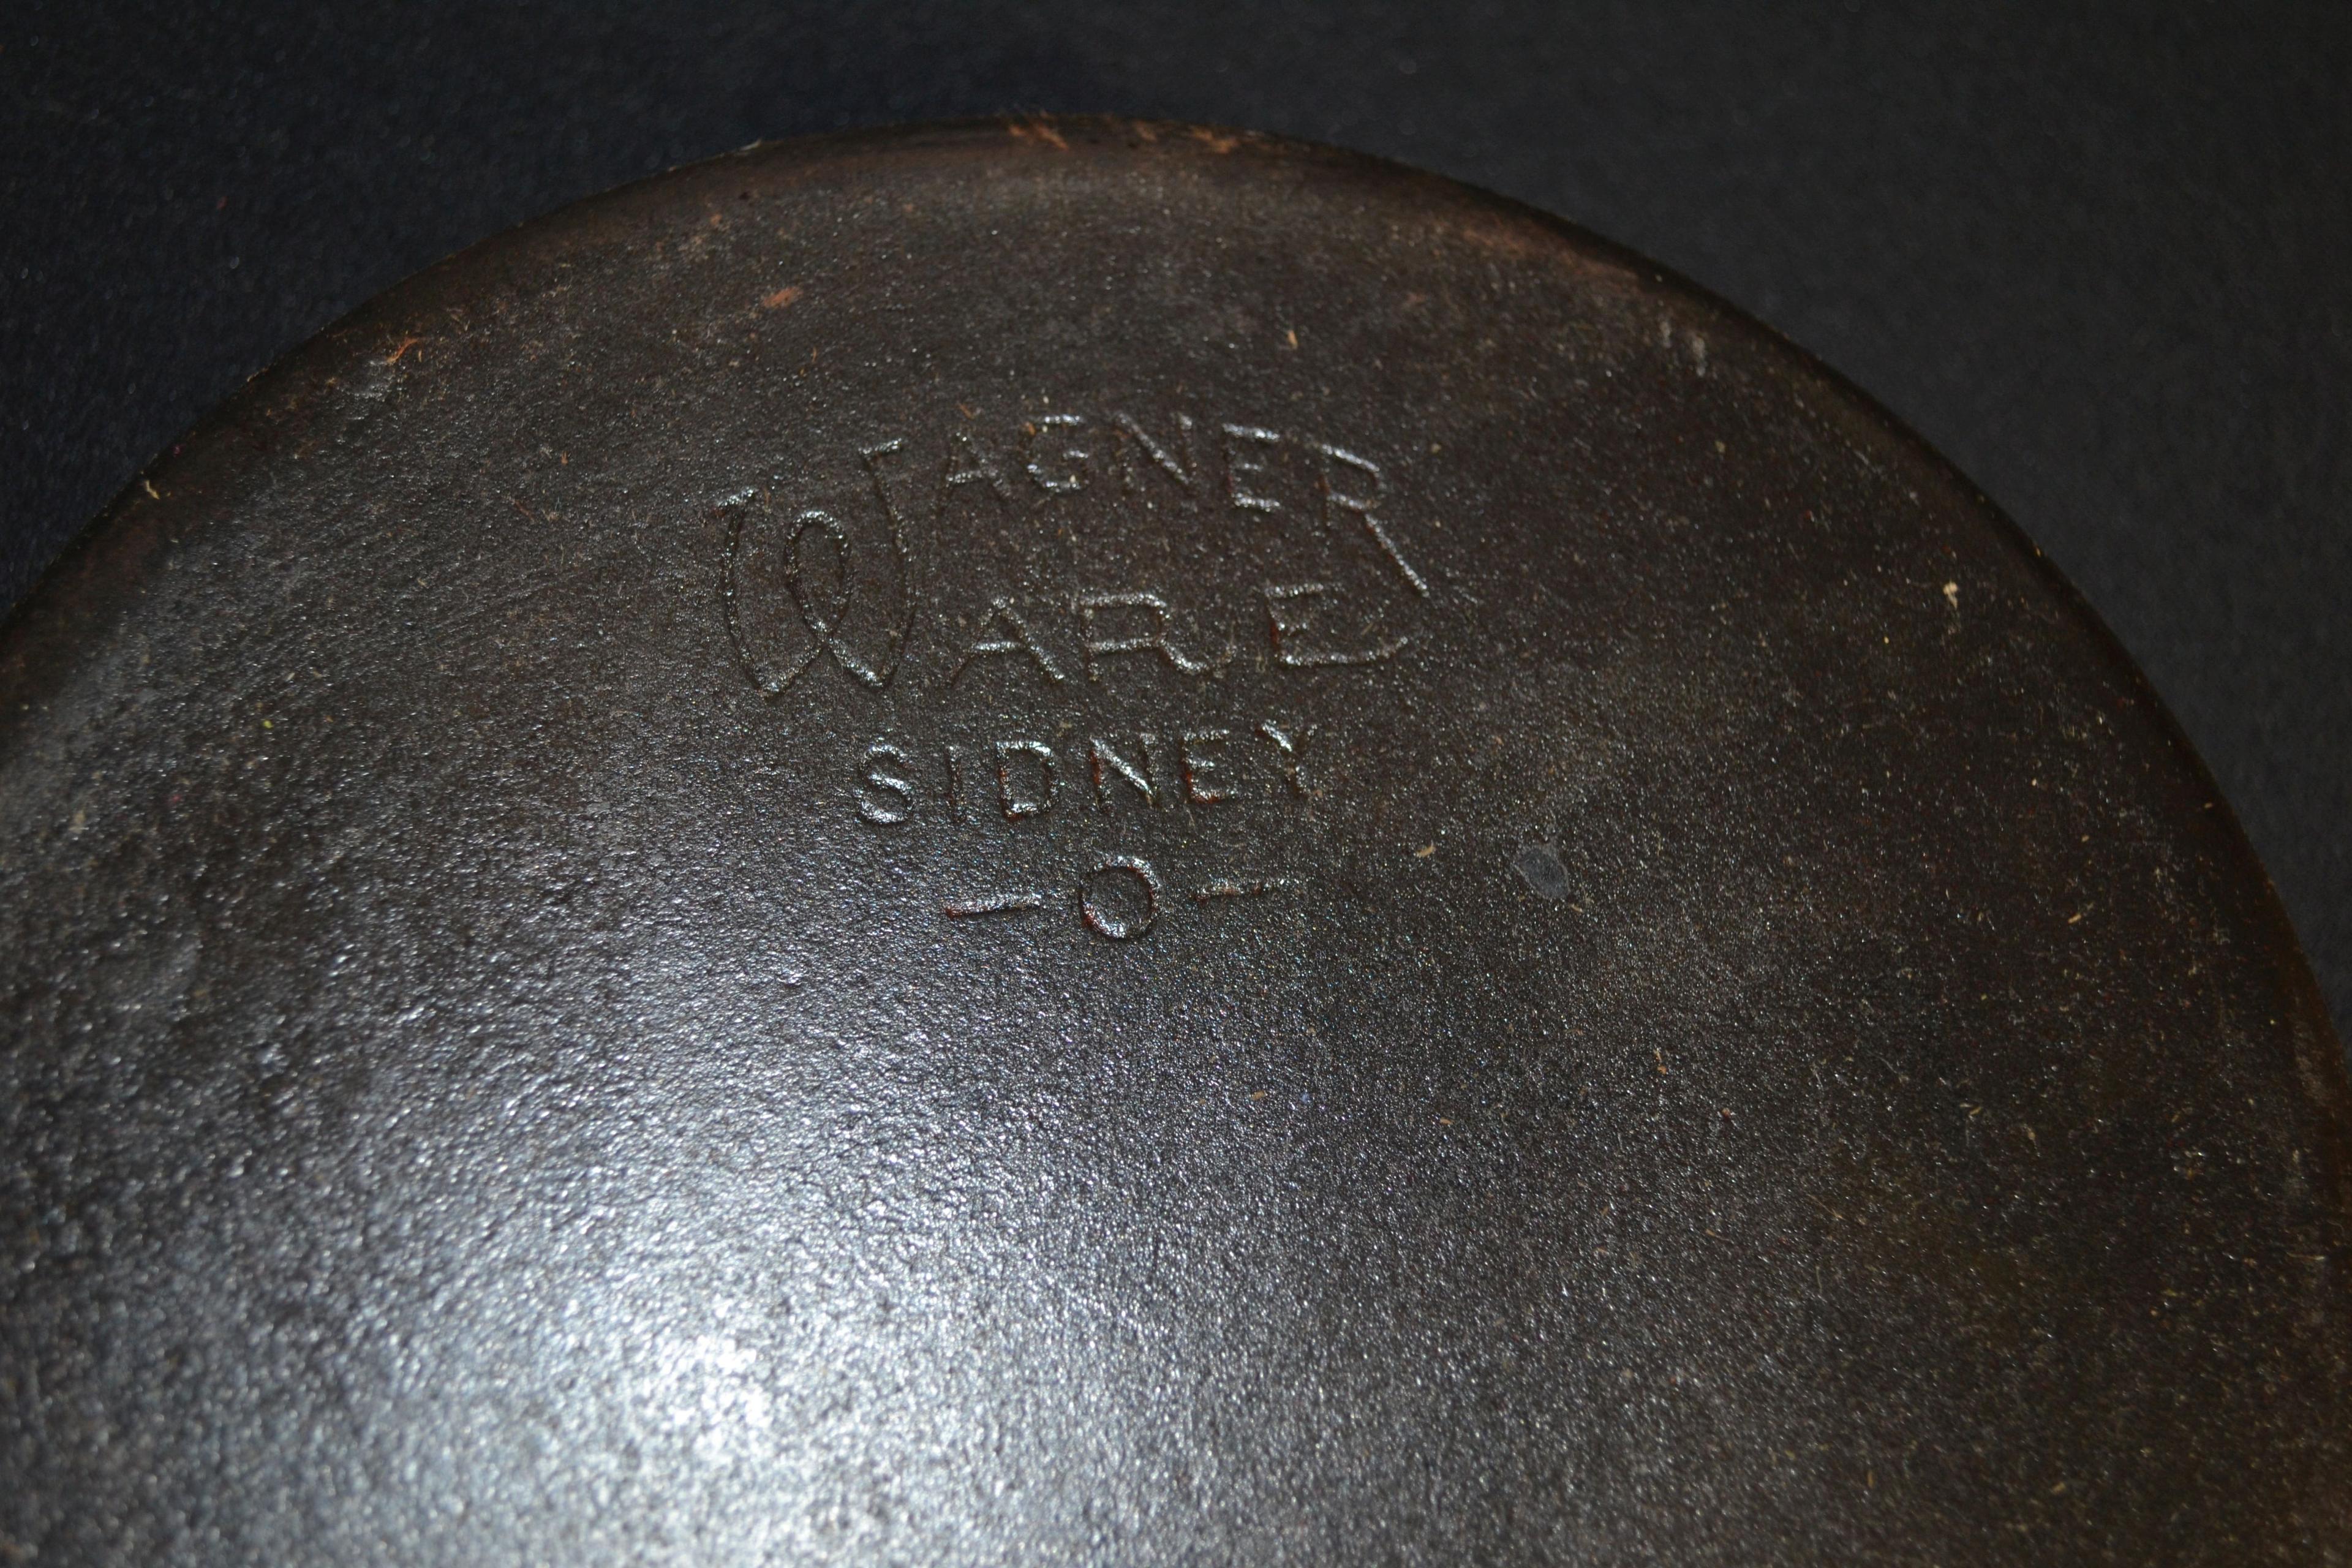 Wagner No. 8 Cast Iron Skillet